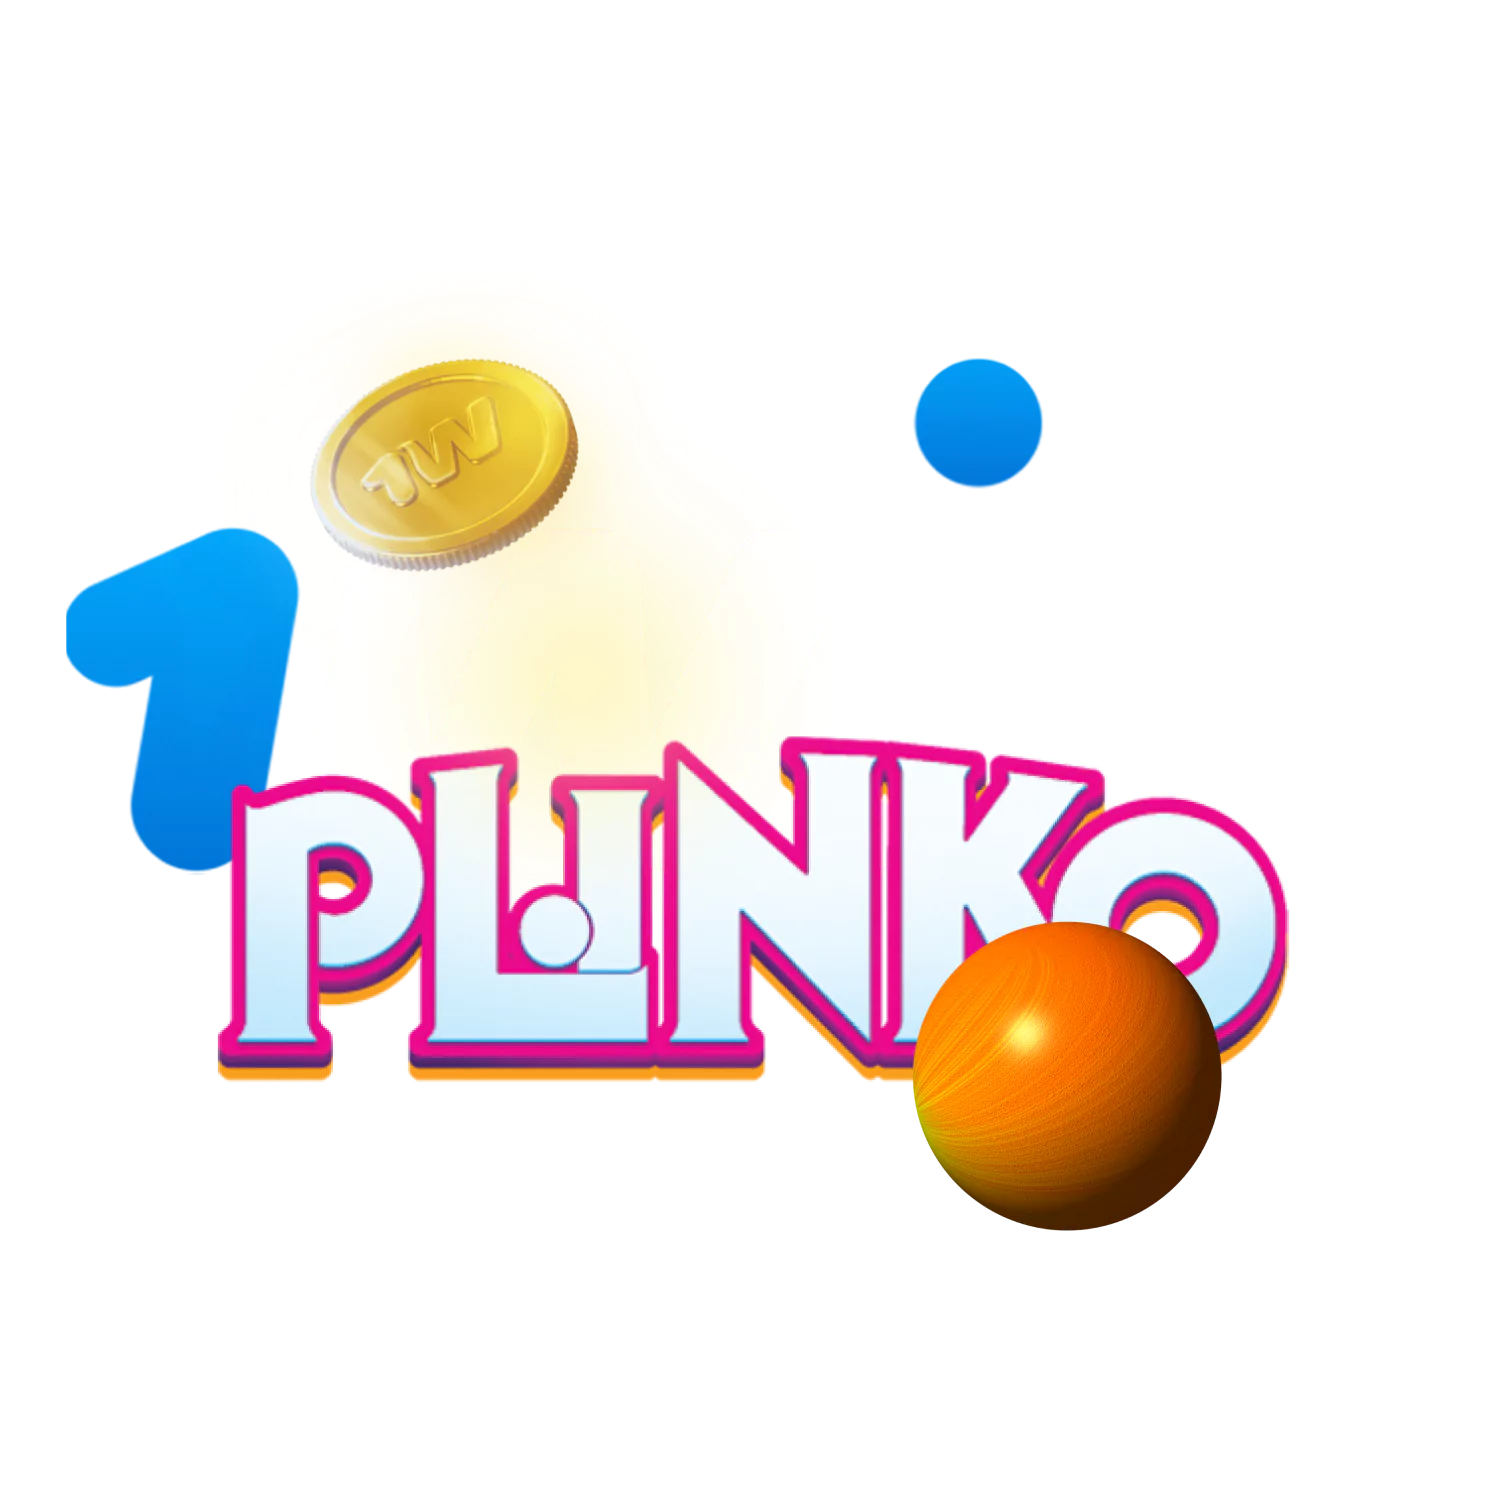 Learn about playing the Plinko game on 1win.